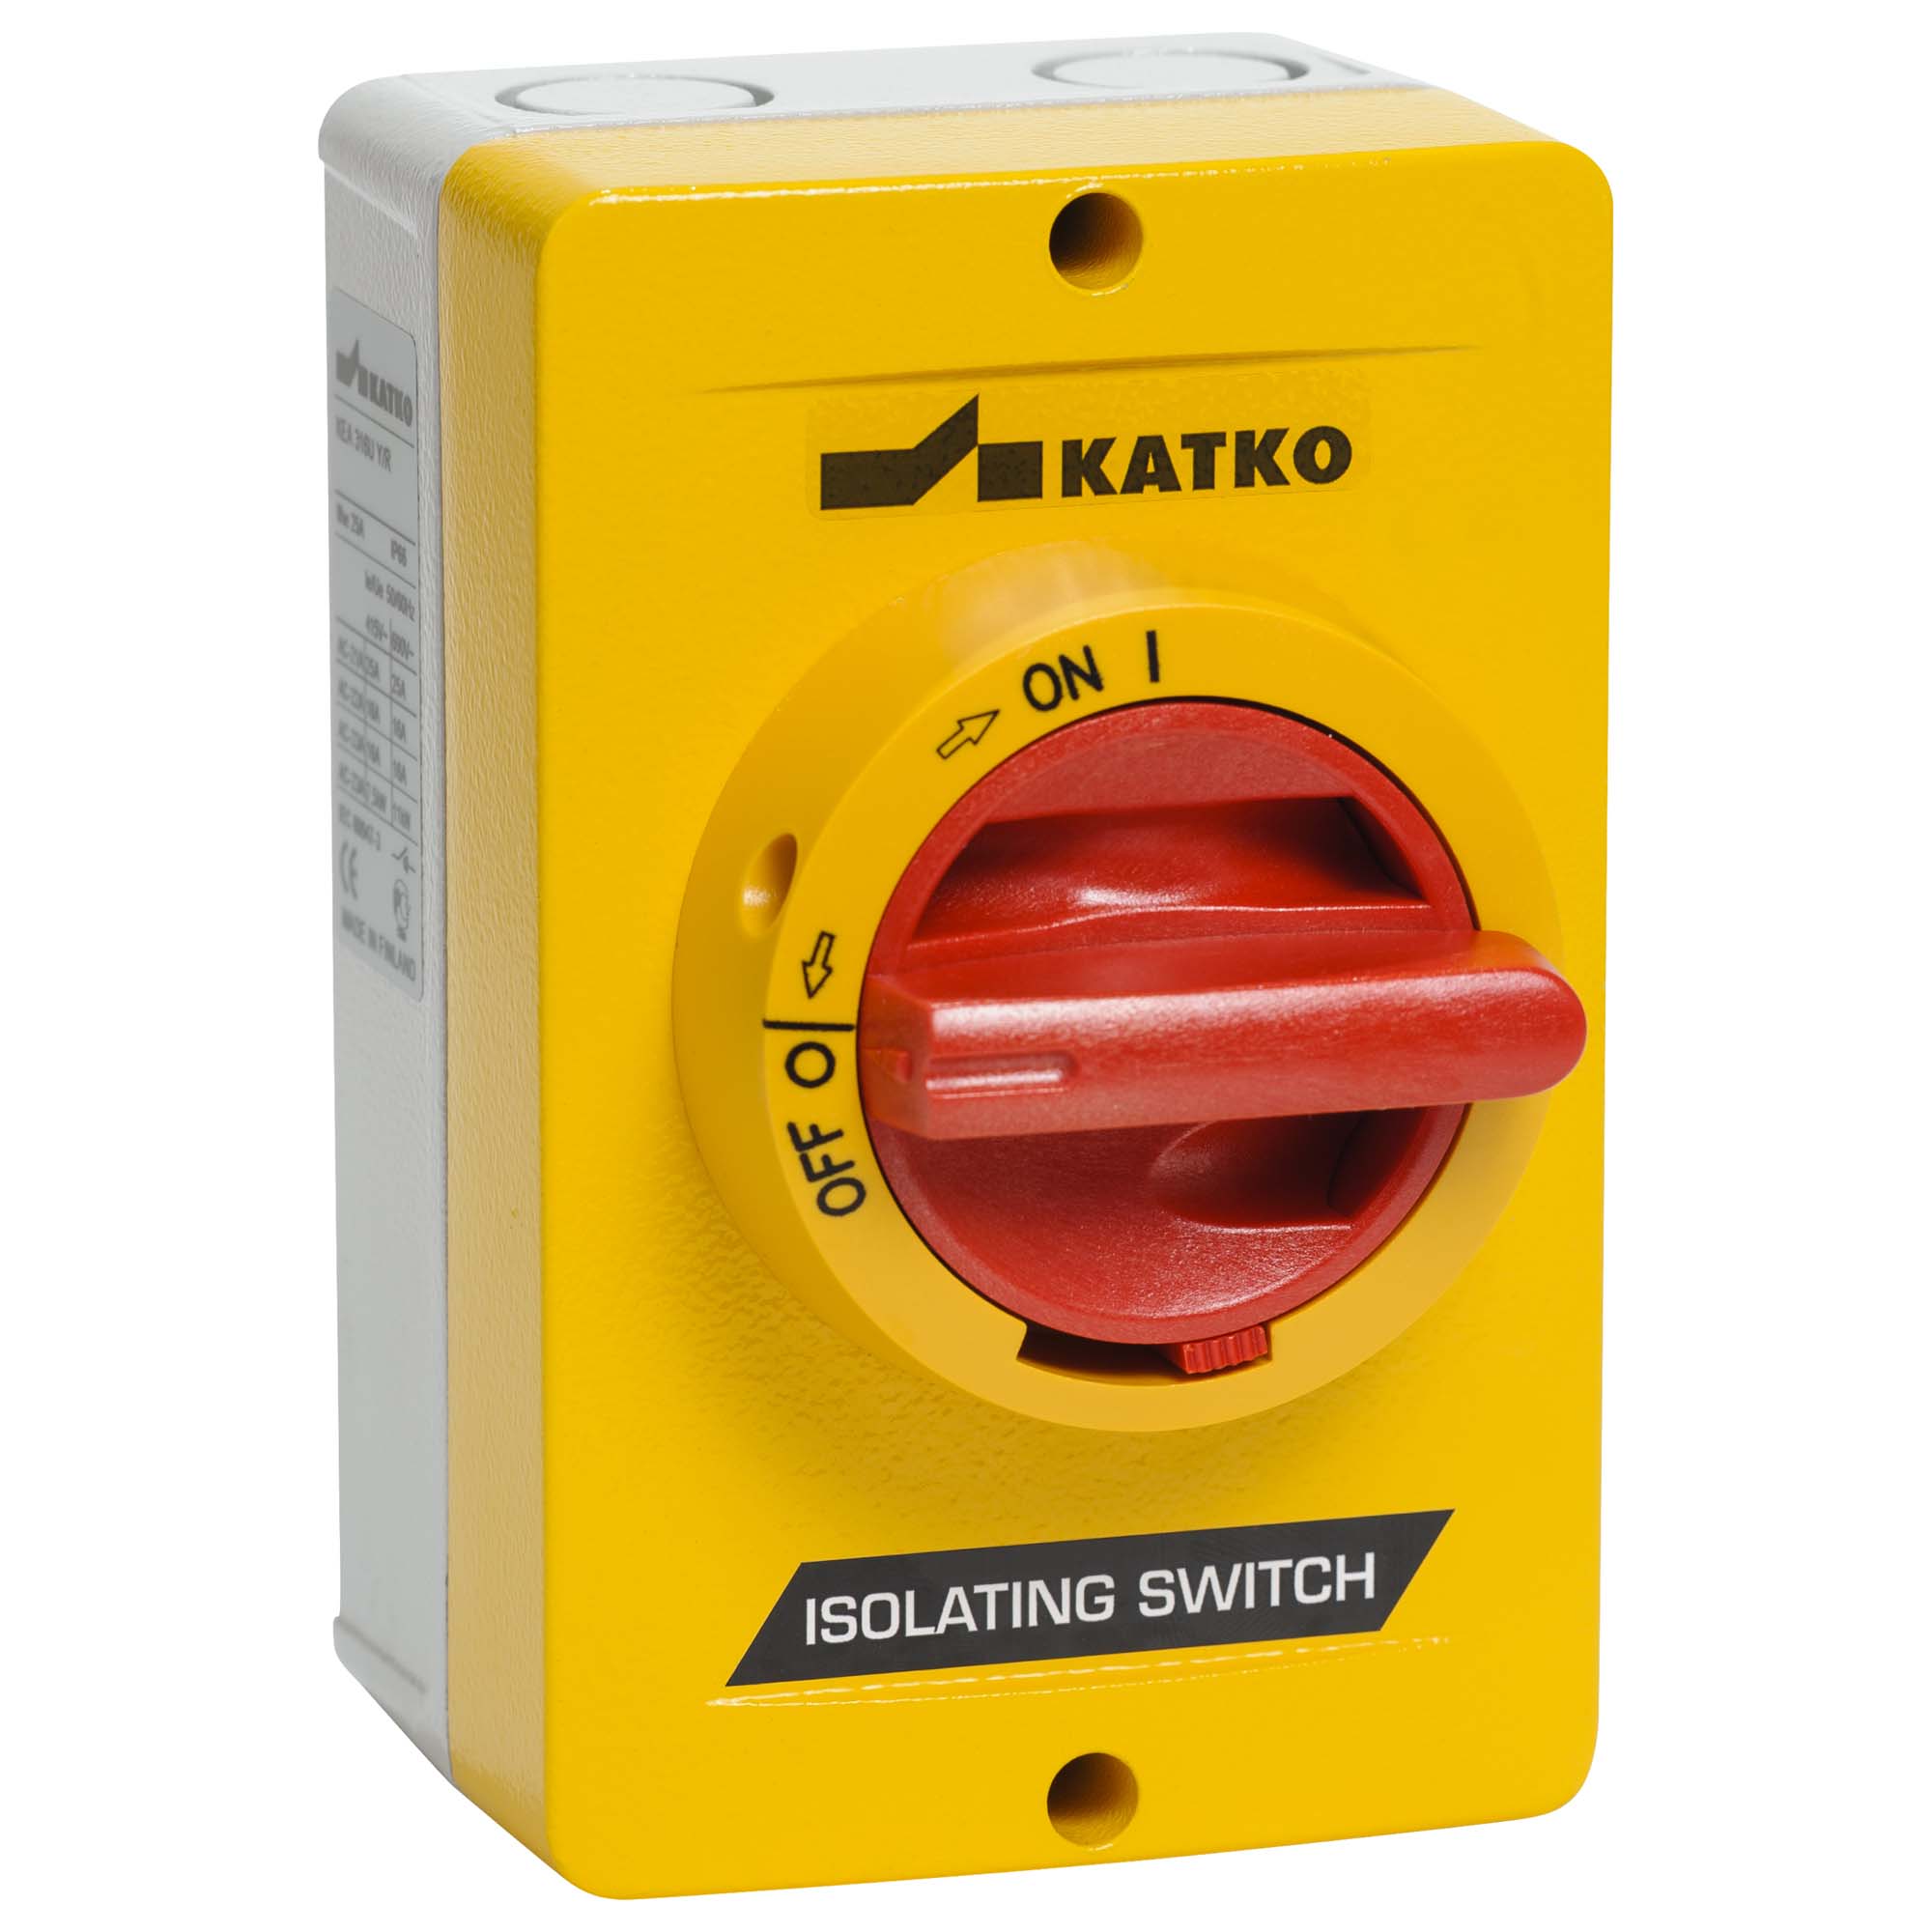 62-KEA 316 YR A2 KEA 16-250A Good UV resistance, suitable for applications in extreme conditions. Possibility for 3 padlock locks. Also available in ATEX version or with red housing as a fireman's switch.